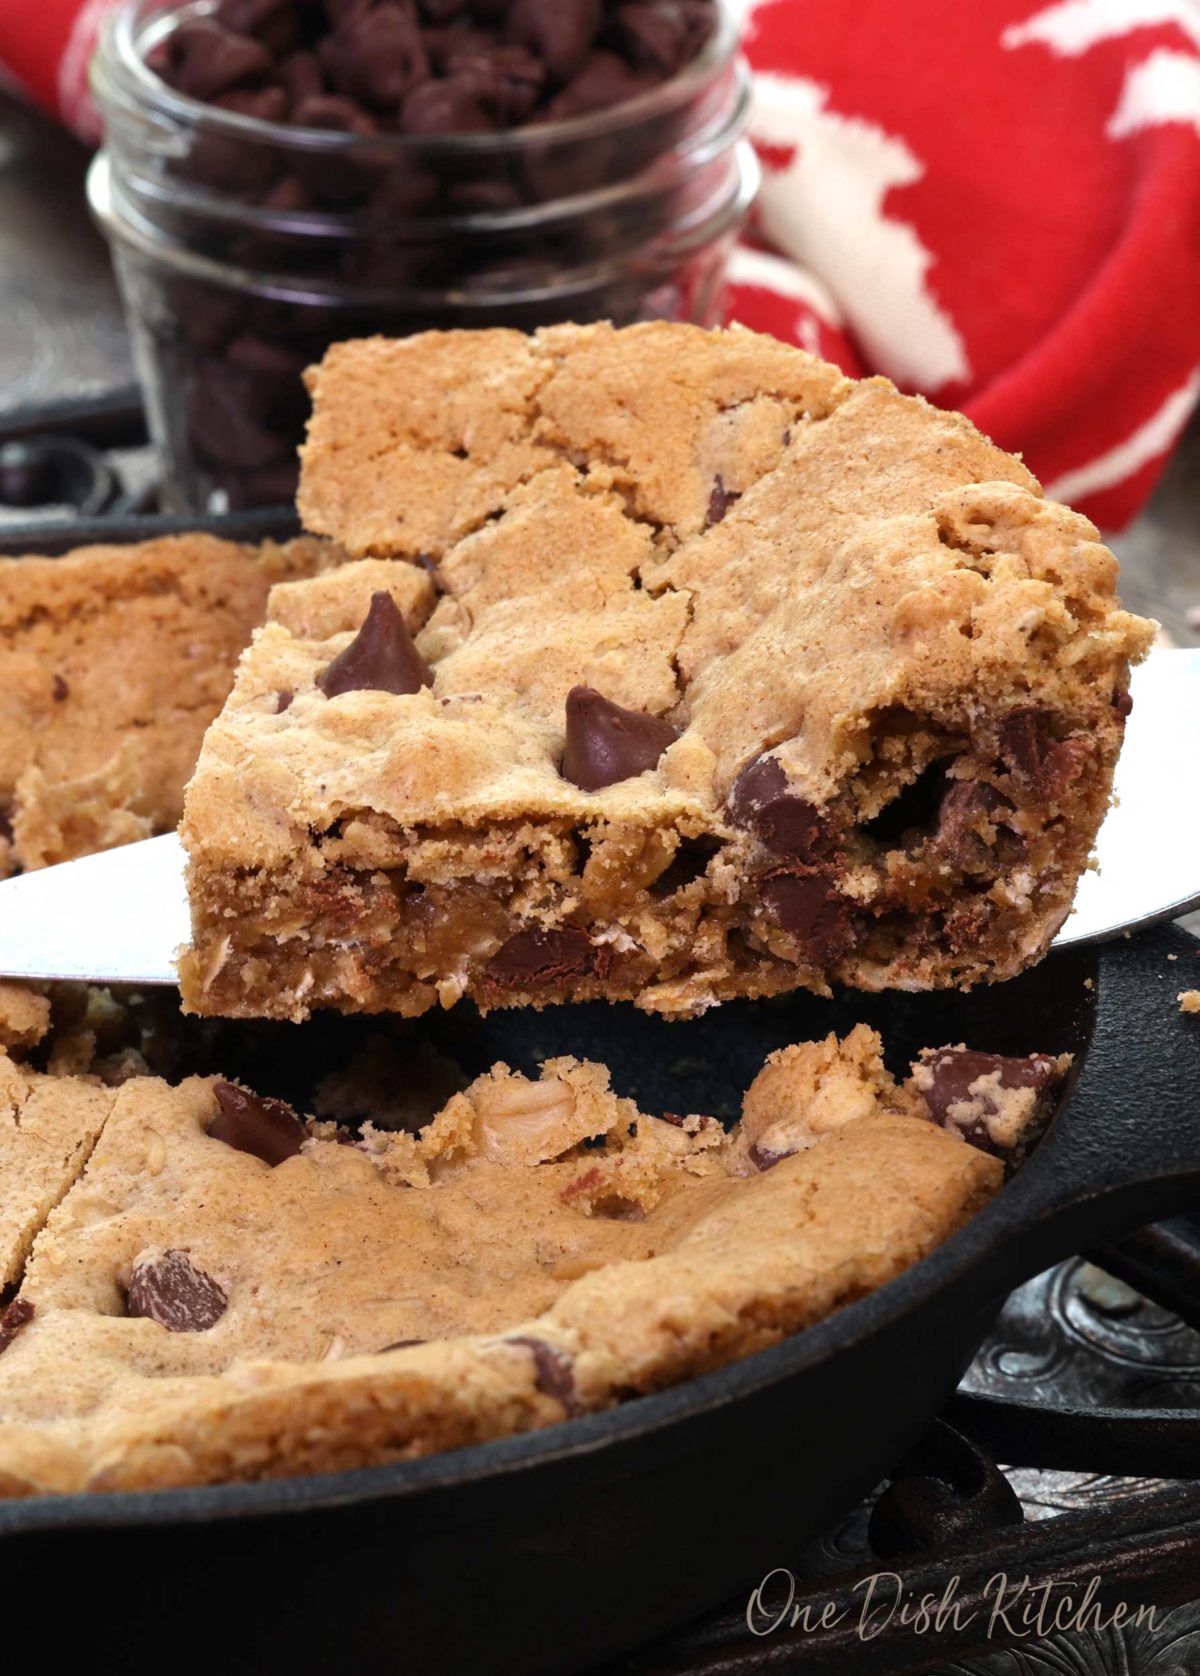 a slice of a chocolate chip oatmeal skillet cookie being transferred from the skillet to a plate.